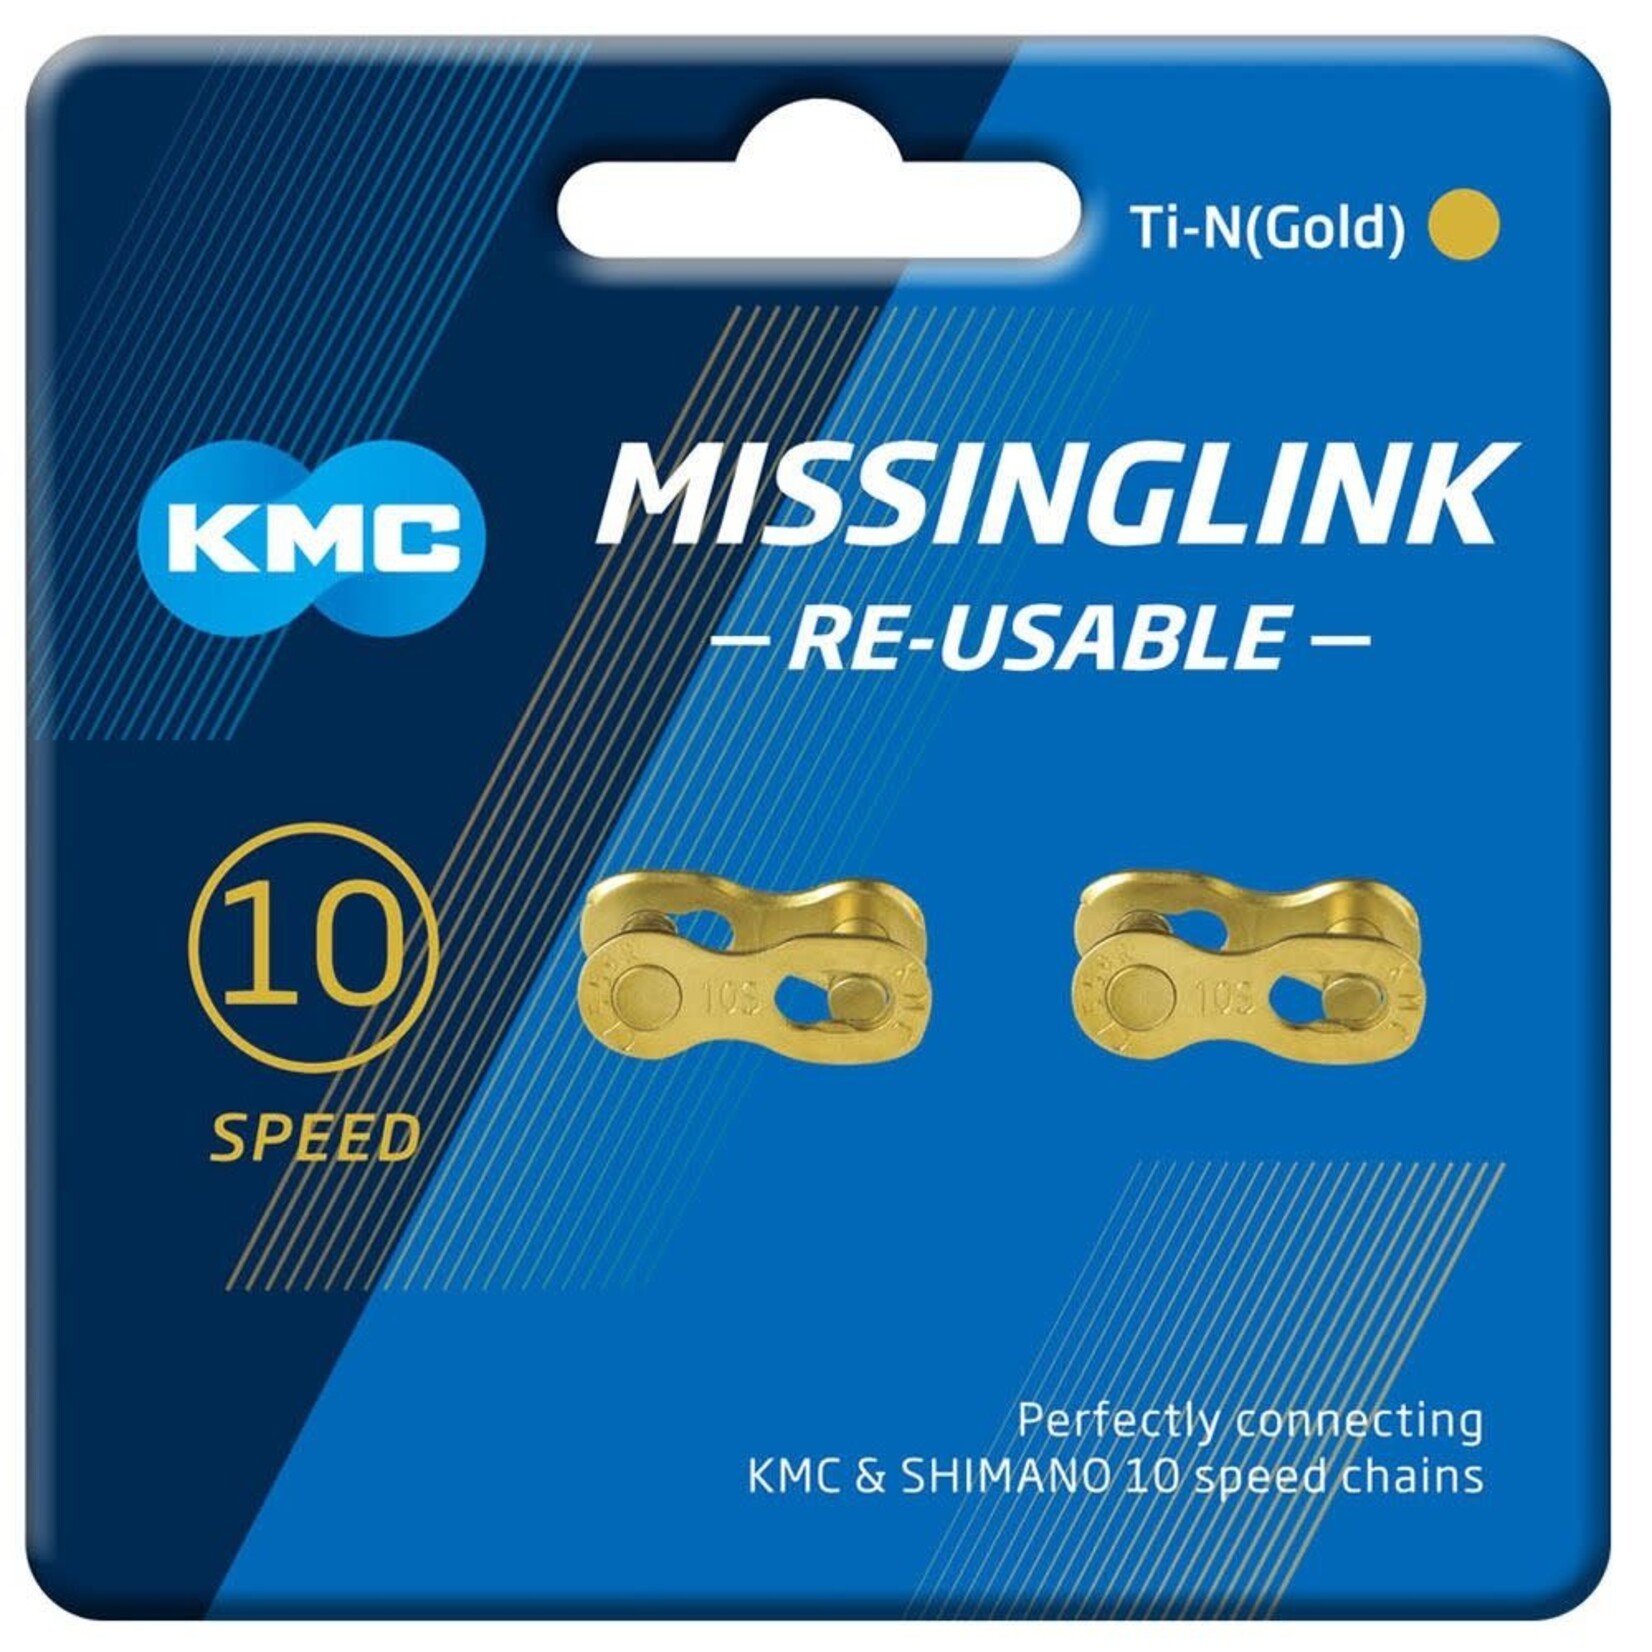 KMC KMC 10speed Ti-N Gold Missing Link 5.88mm (x2) Re-Usable